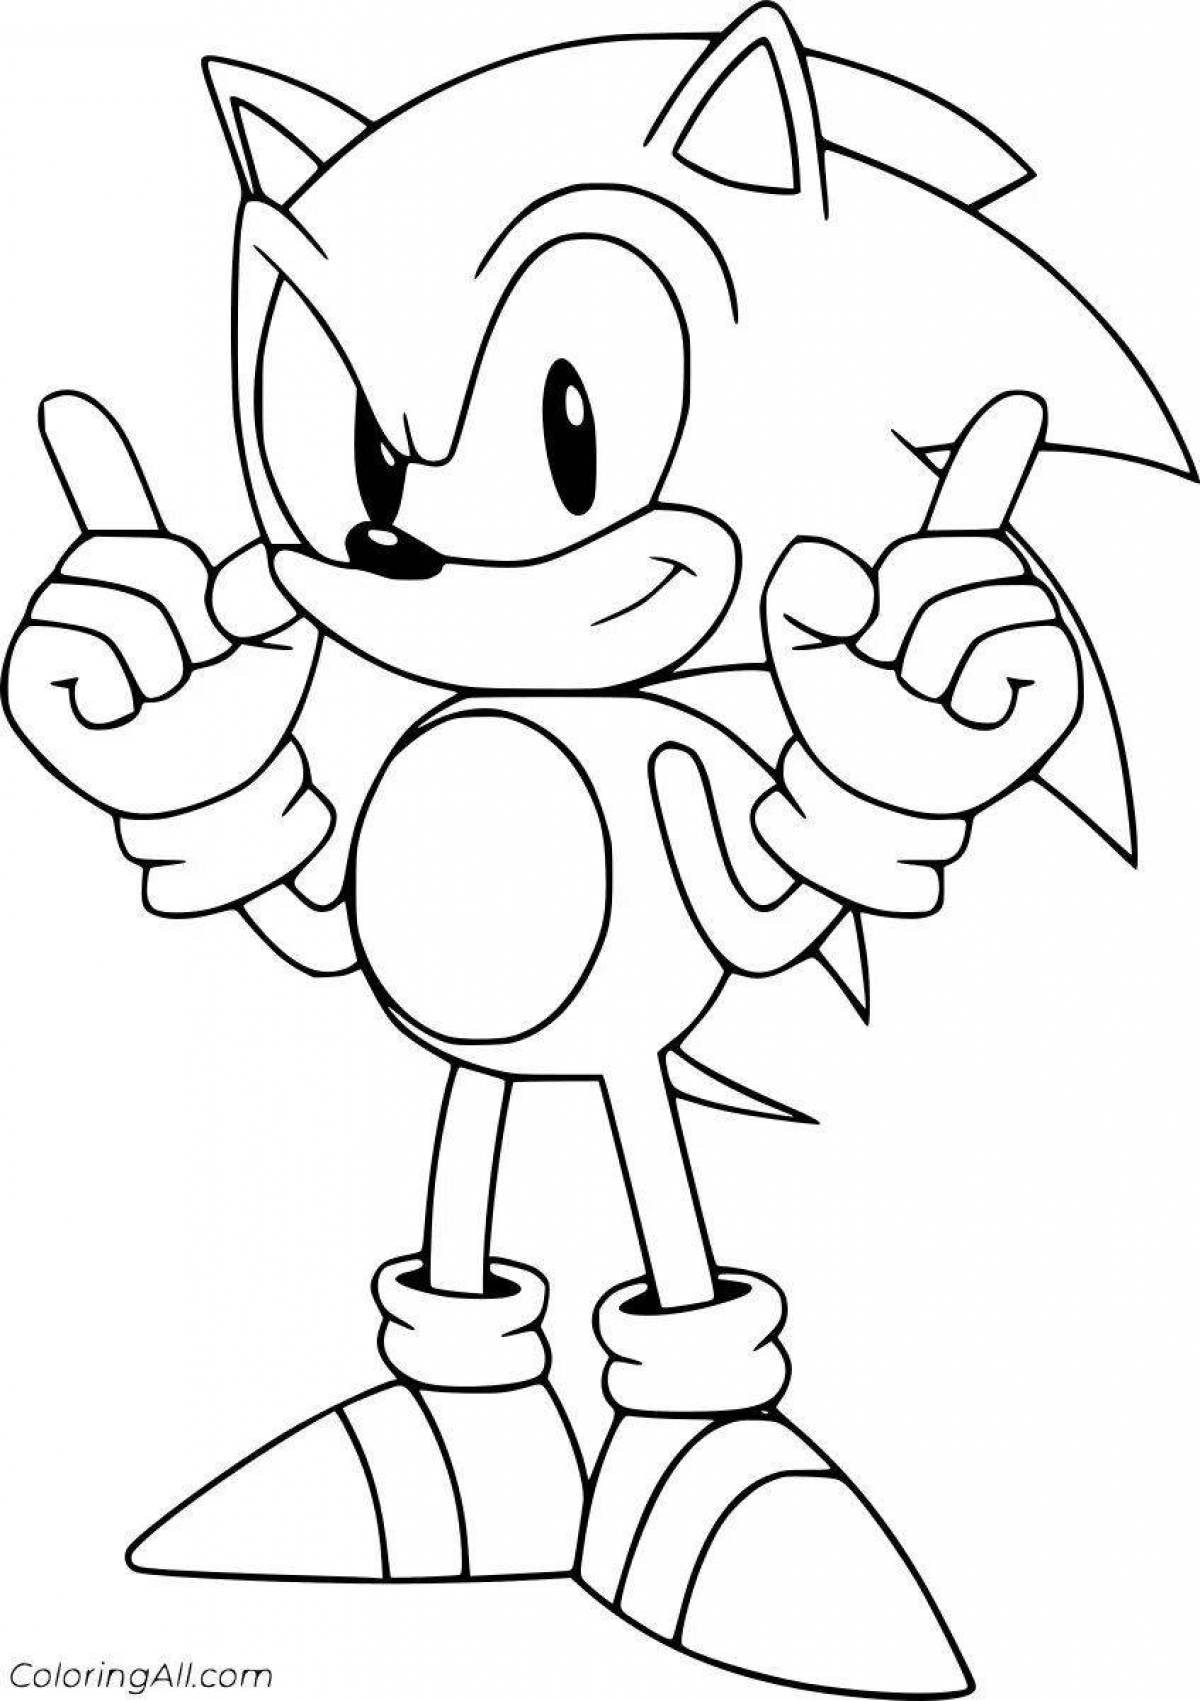 Coloring book shining baby sonic